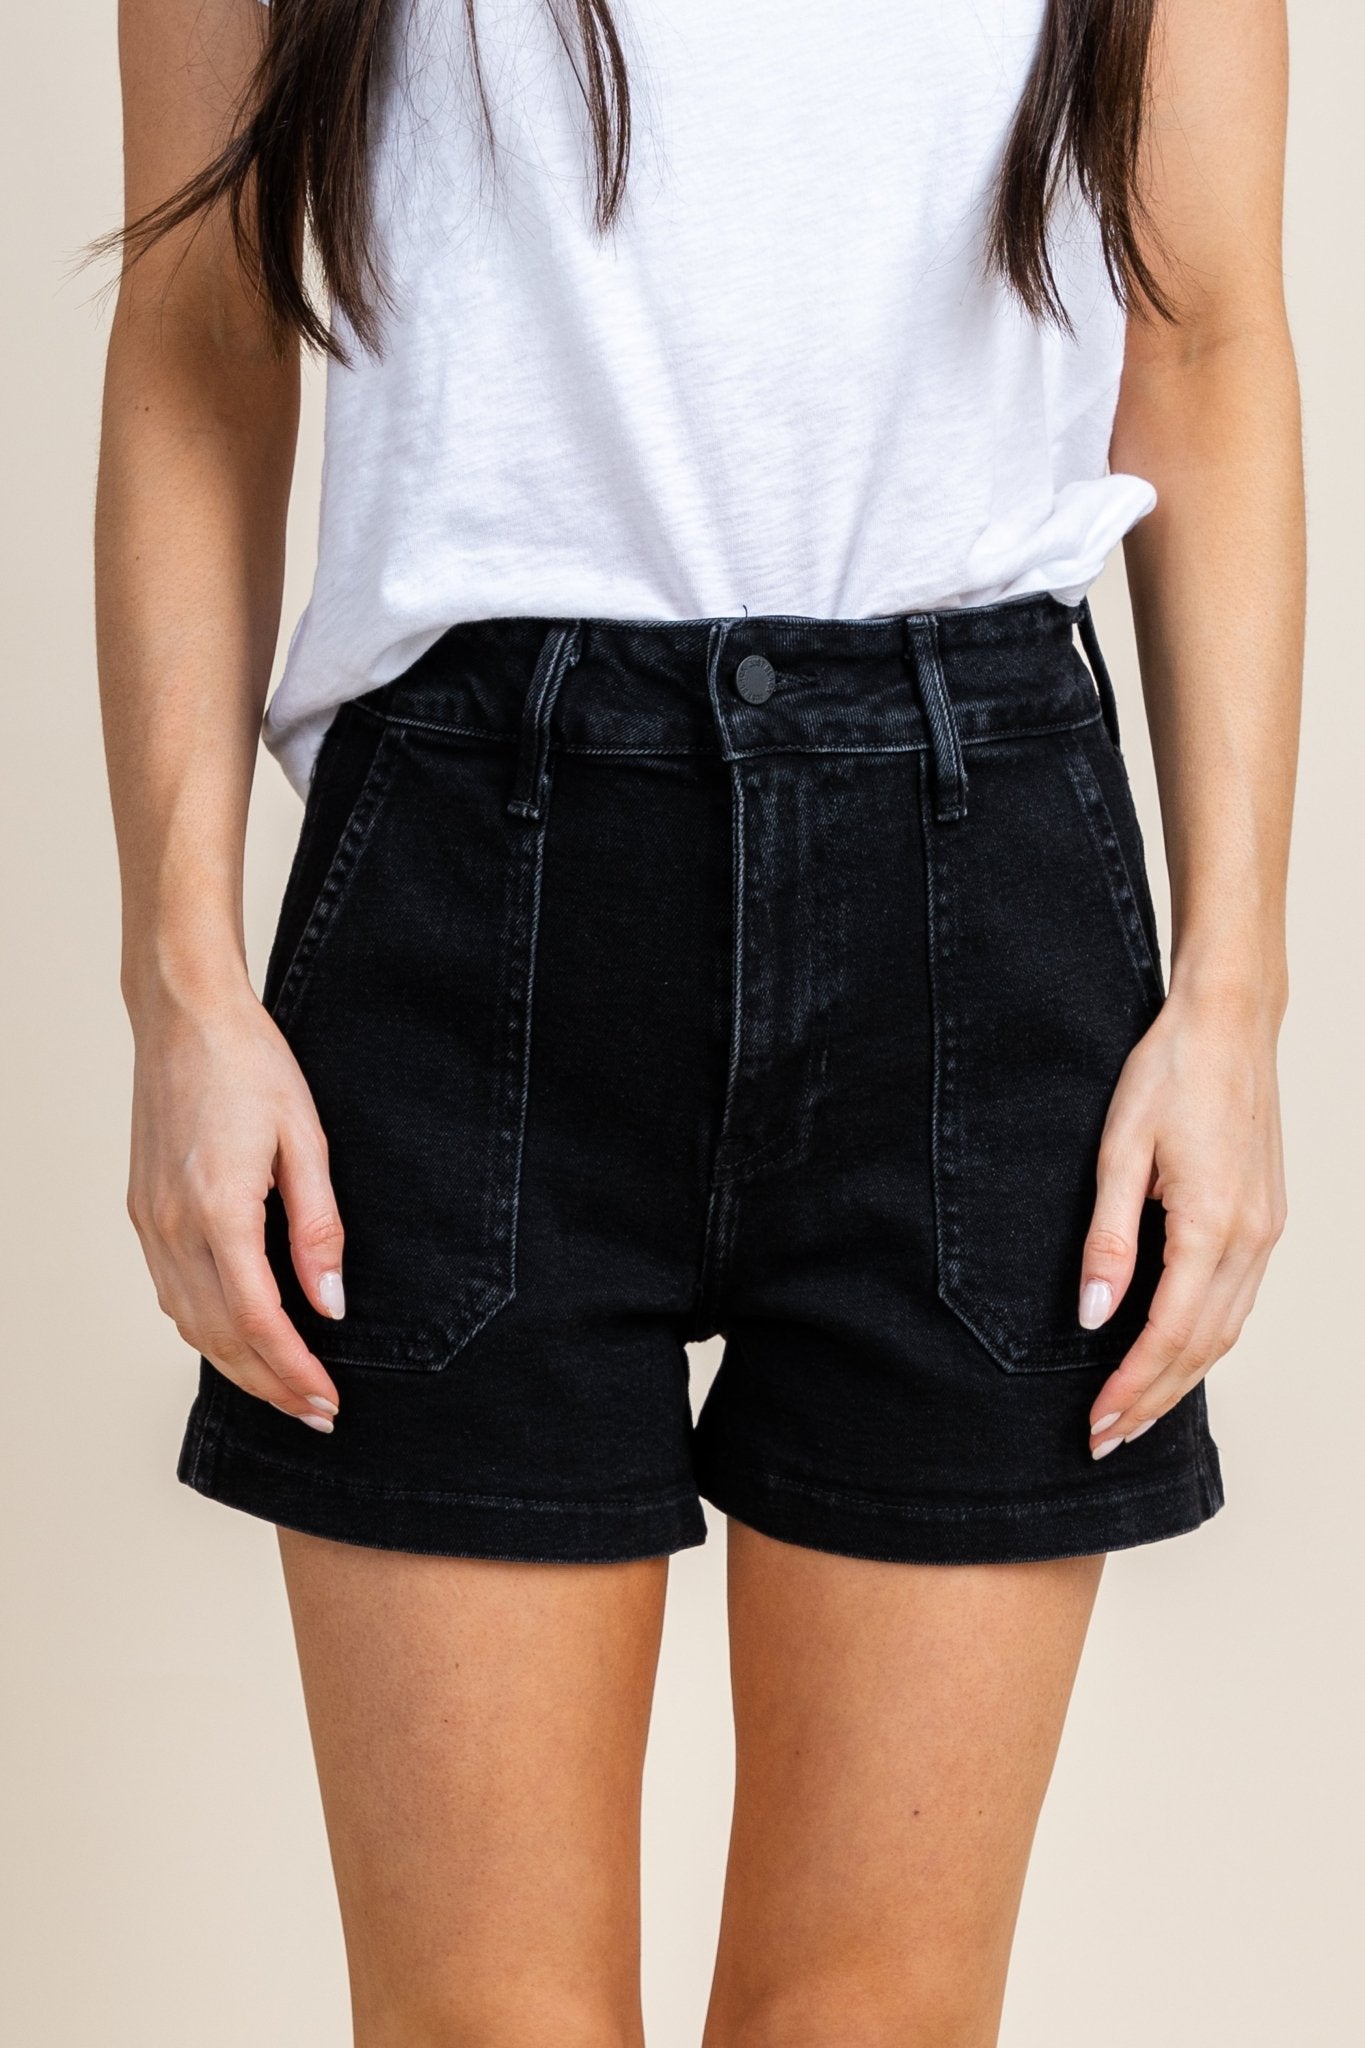 High rise cargo shorts washed black - Trendy Shorts - Cute Vacation Collection at Lush Fashion Lounge Boutique in Oklahoma City